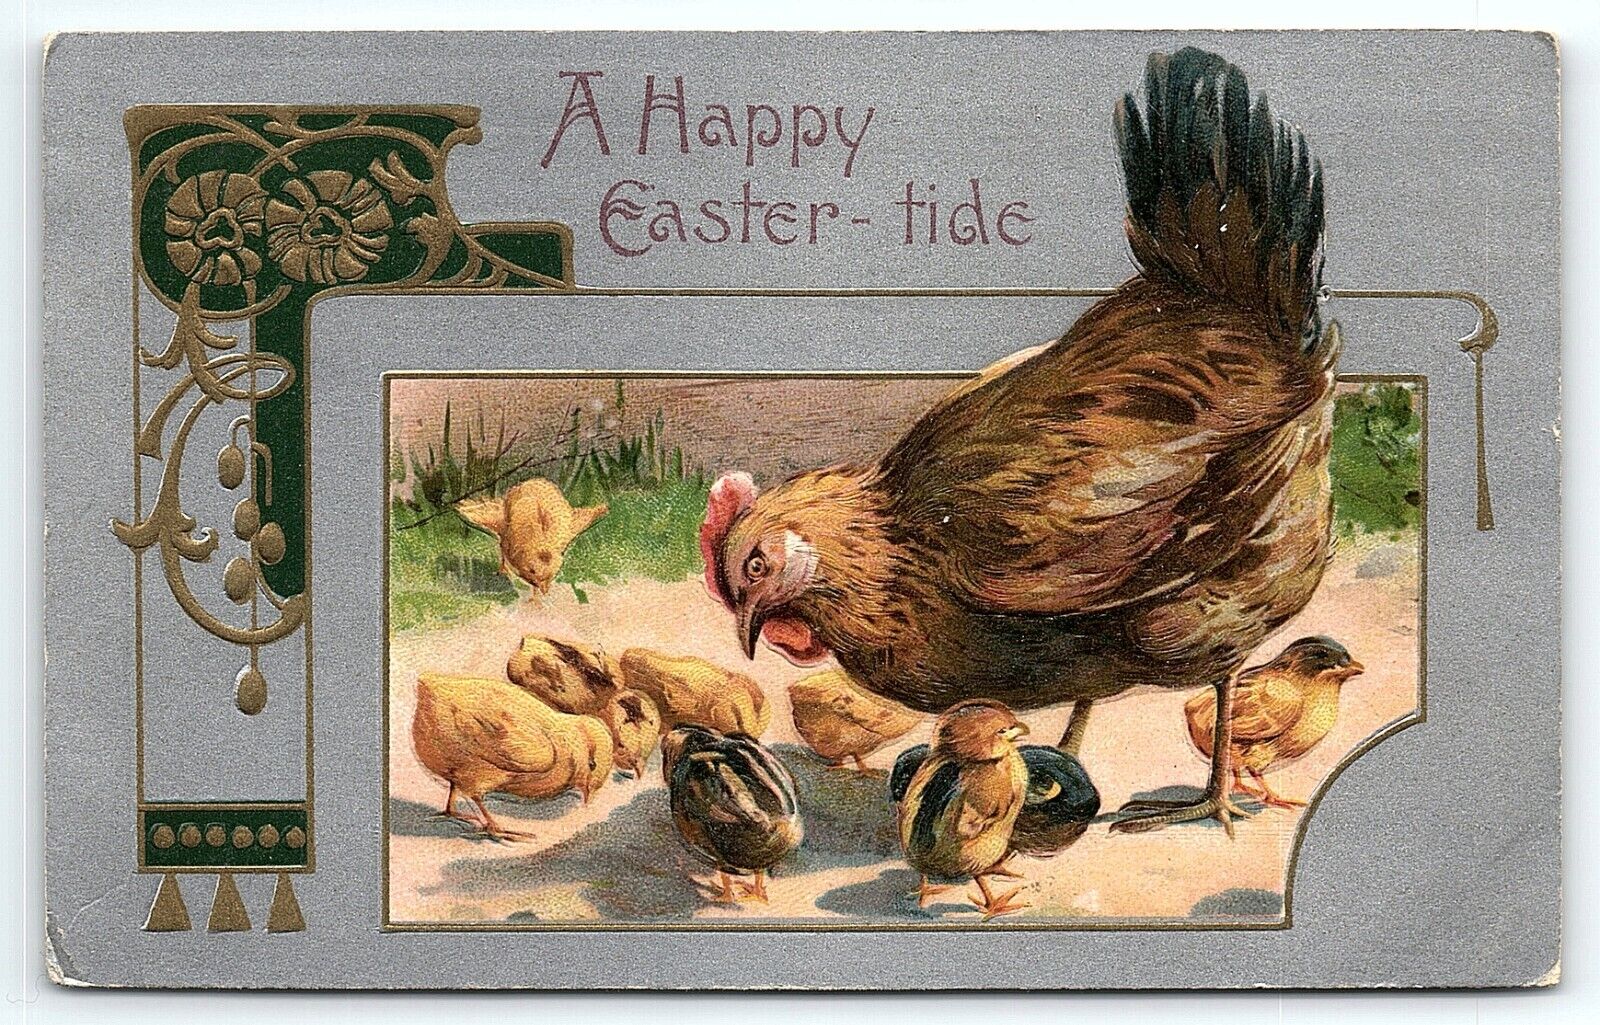 1909 HAPPY EASTER-TIDE BABY CHICKS OXFORD OH WINSCH BACK EMBOSSED POSTCARD P3316